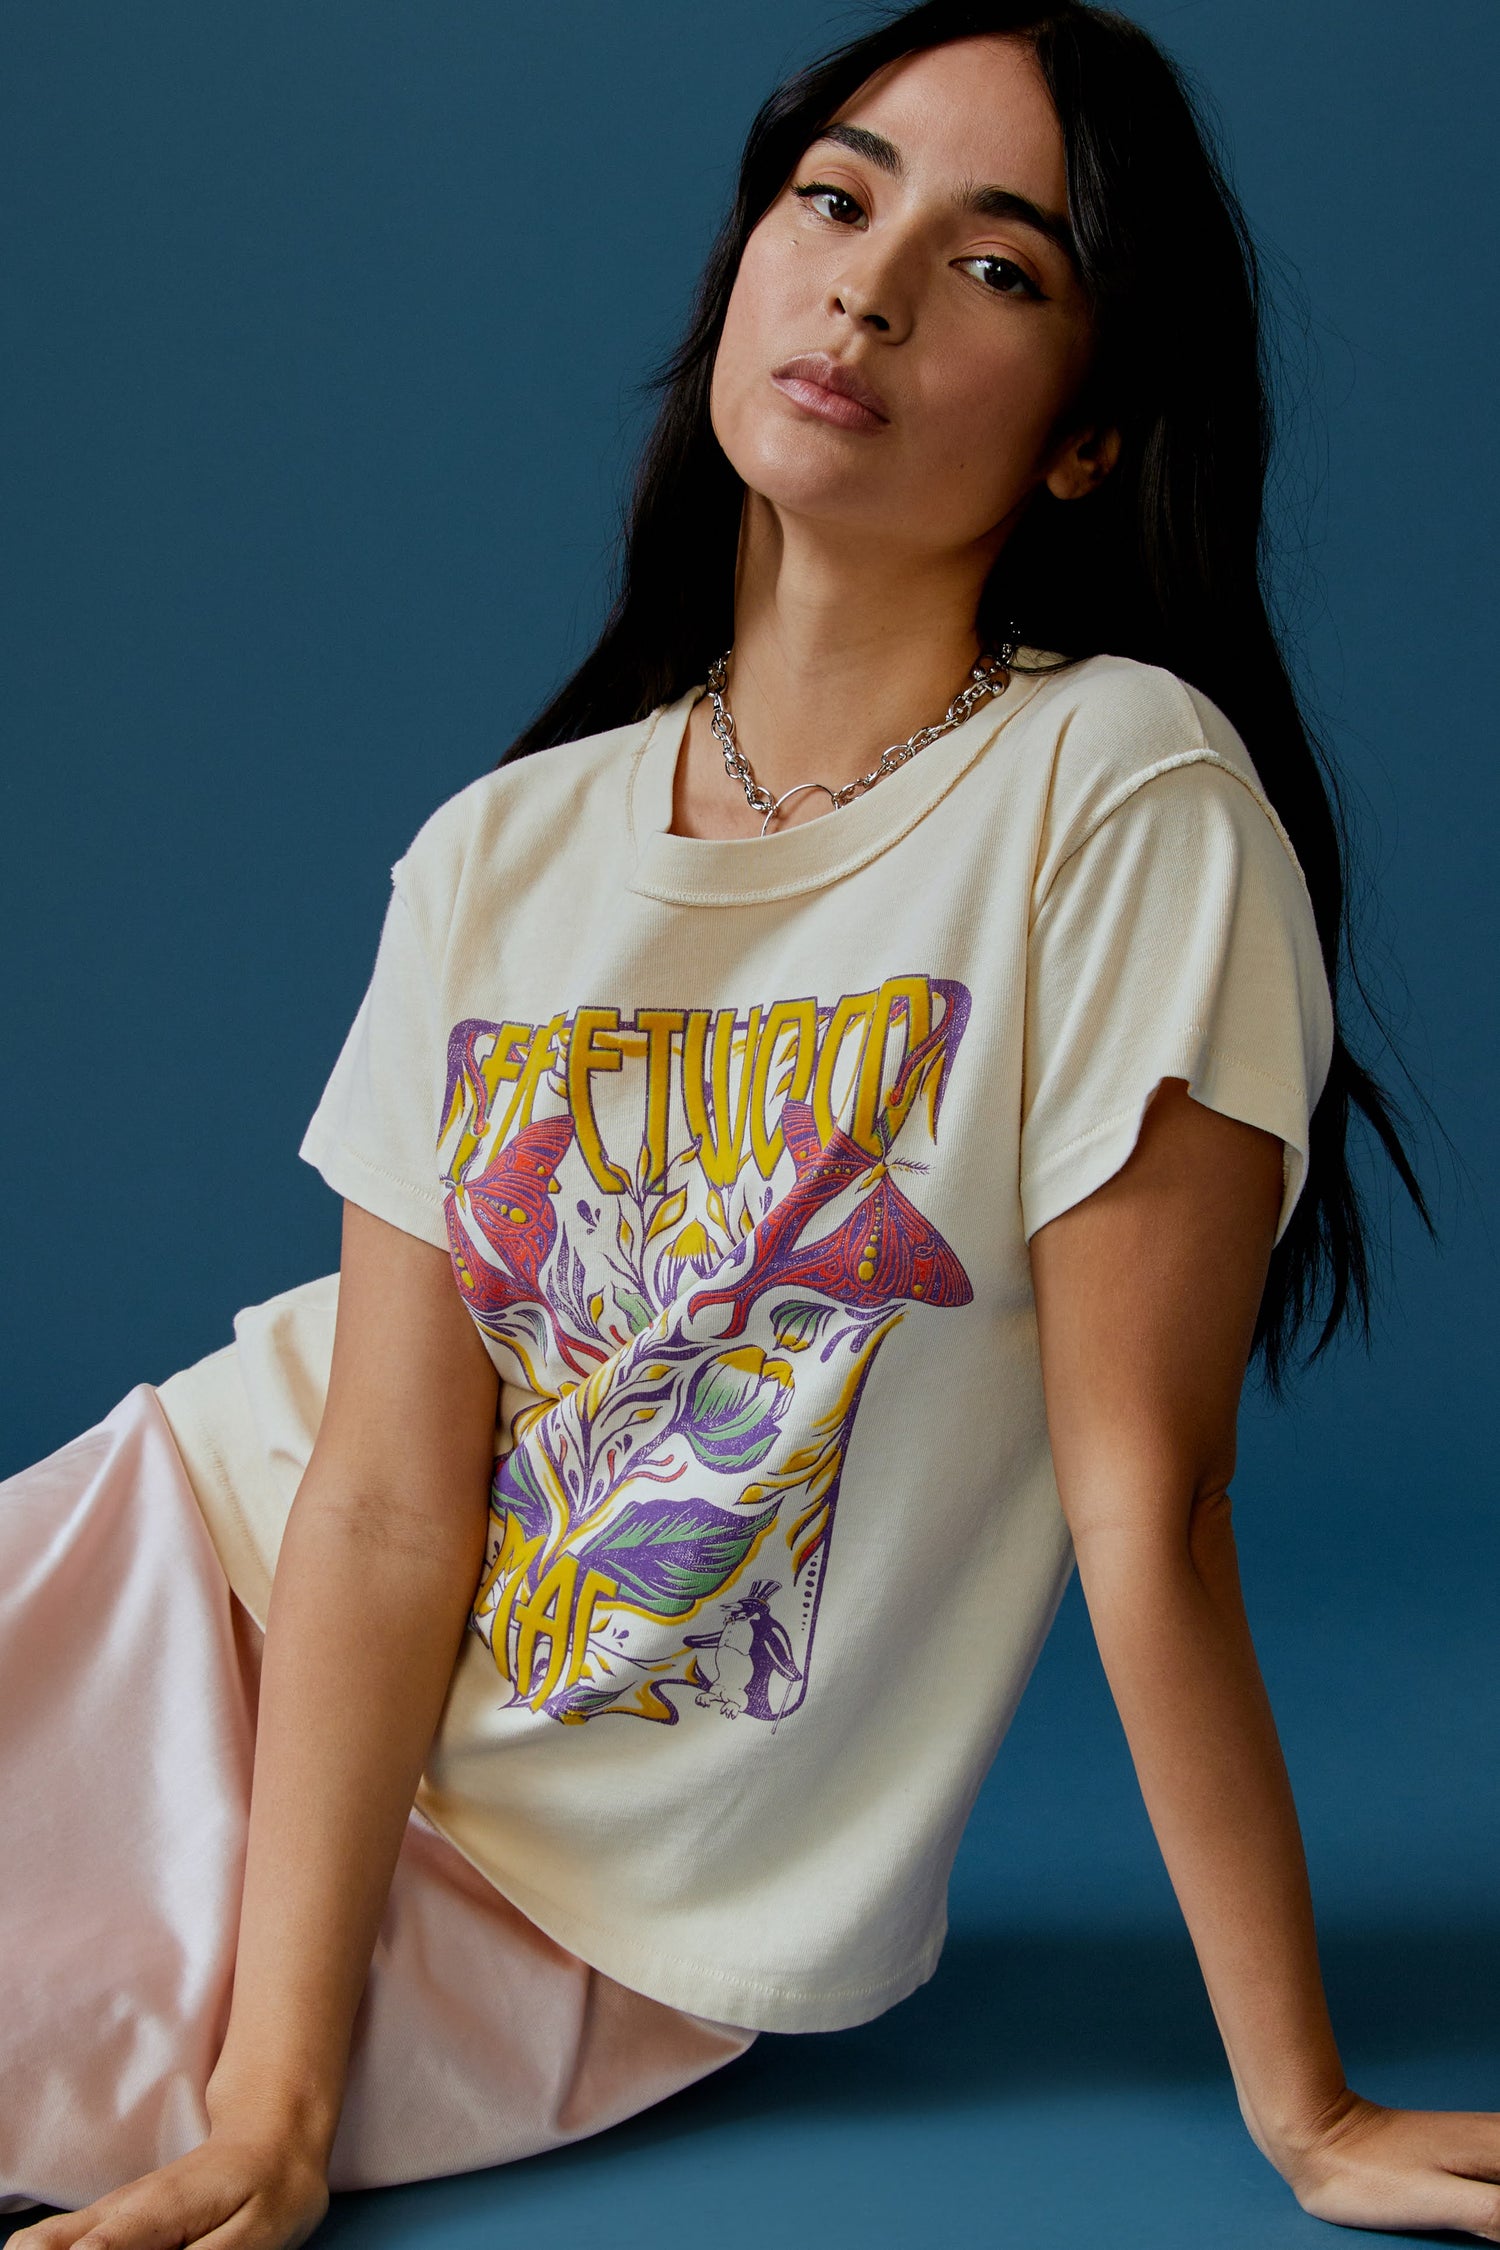 A dark-haired model featuring a parchment-colored tee stamped with the band's name, designed with a graphic of leaves, flowers, and butterflies on the center.